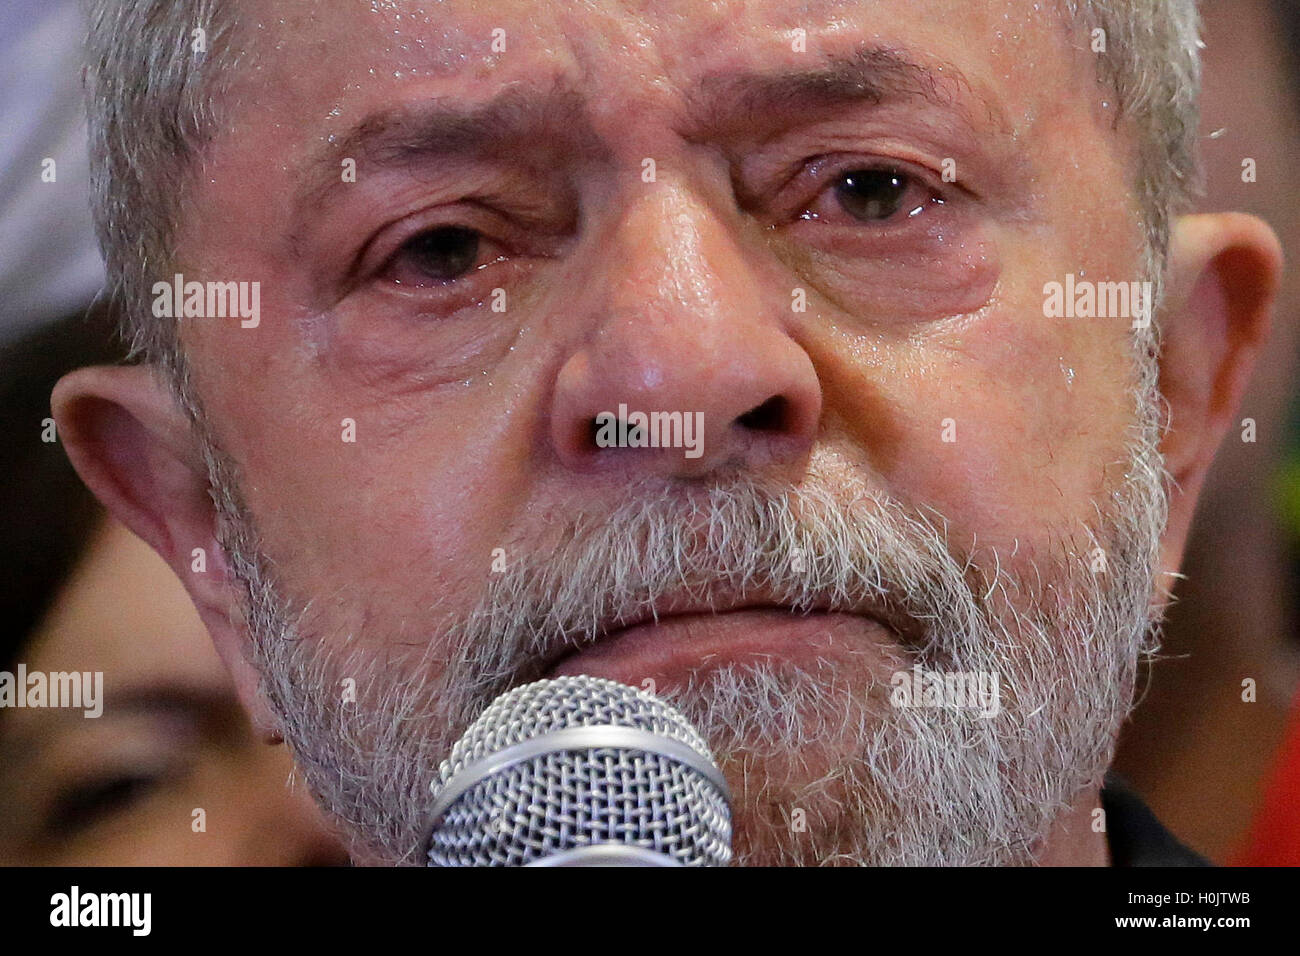 Sao Paulo. 15th Sep, 2016. Photo taken on Sept. 15, 2016 shows former Brazilian President Luiz Inacio Lula da Silva reacting during a press conference on the denunciation of the federal public attorney against him and his wife Marisa Leticia for cases of corruption, in Sao Paulo, Brazil. According to local press, the Brazilian federal judge Sergio Moro accepted charges filed last week by prosecutors investigating Lula for alleged corruption and money laundering in the case of corruption in the state oil company Petrobras. © Nelson Antoine/AGENCIA ESTADO/Xinhua/Alamy Live News Stock Photo